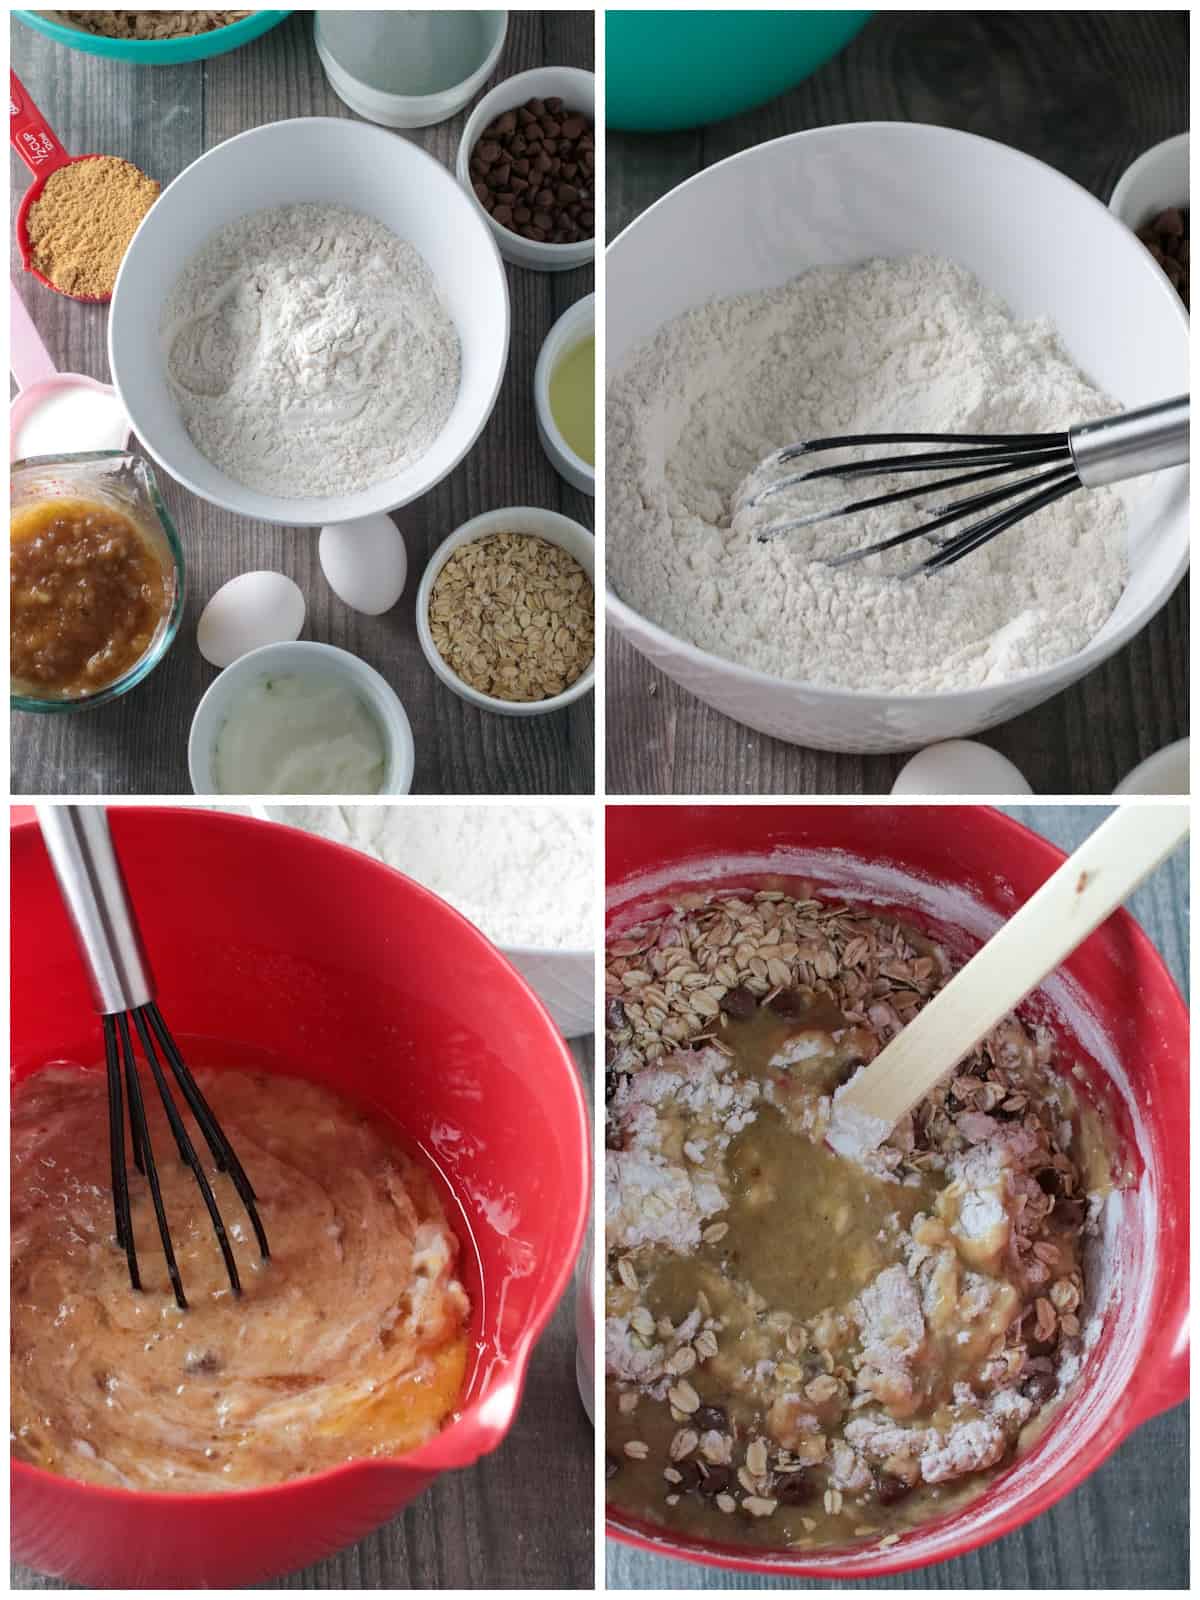 The stages of mixing the banana muffin batter (mixing the dry ingredients, then mixing all the wet ingredients, and combining the two.